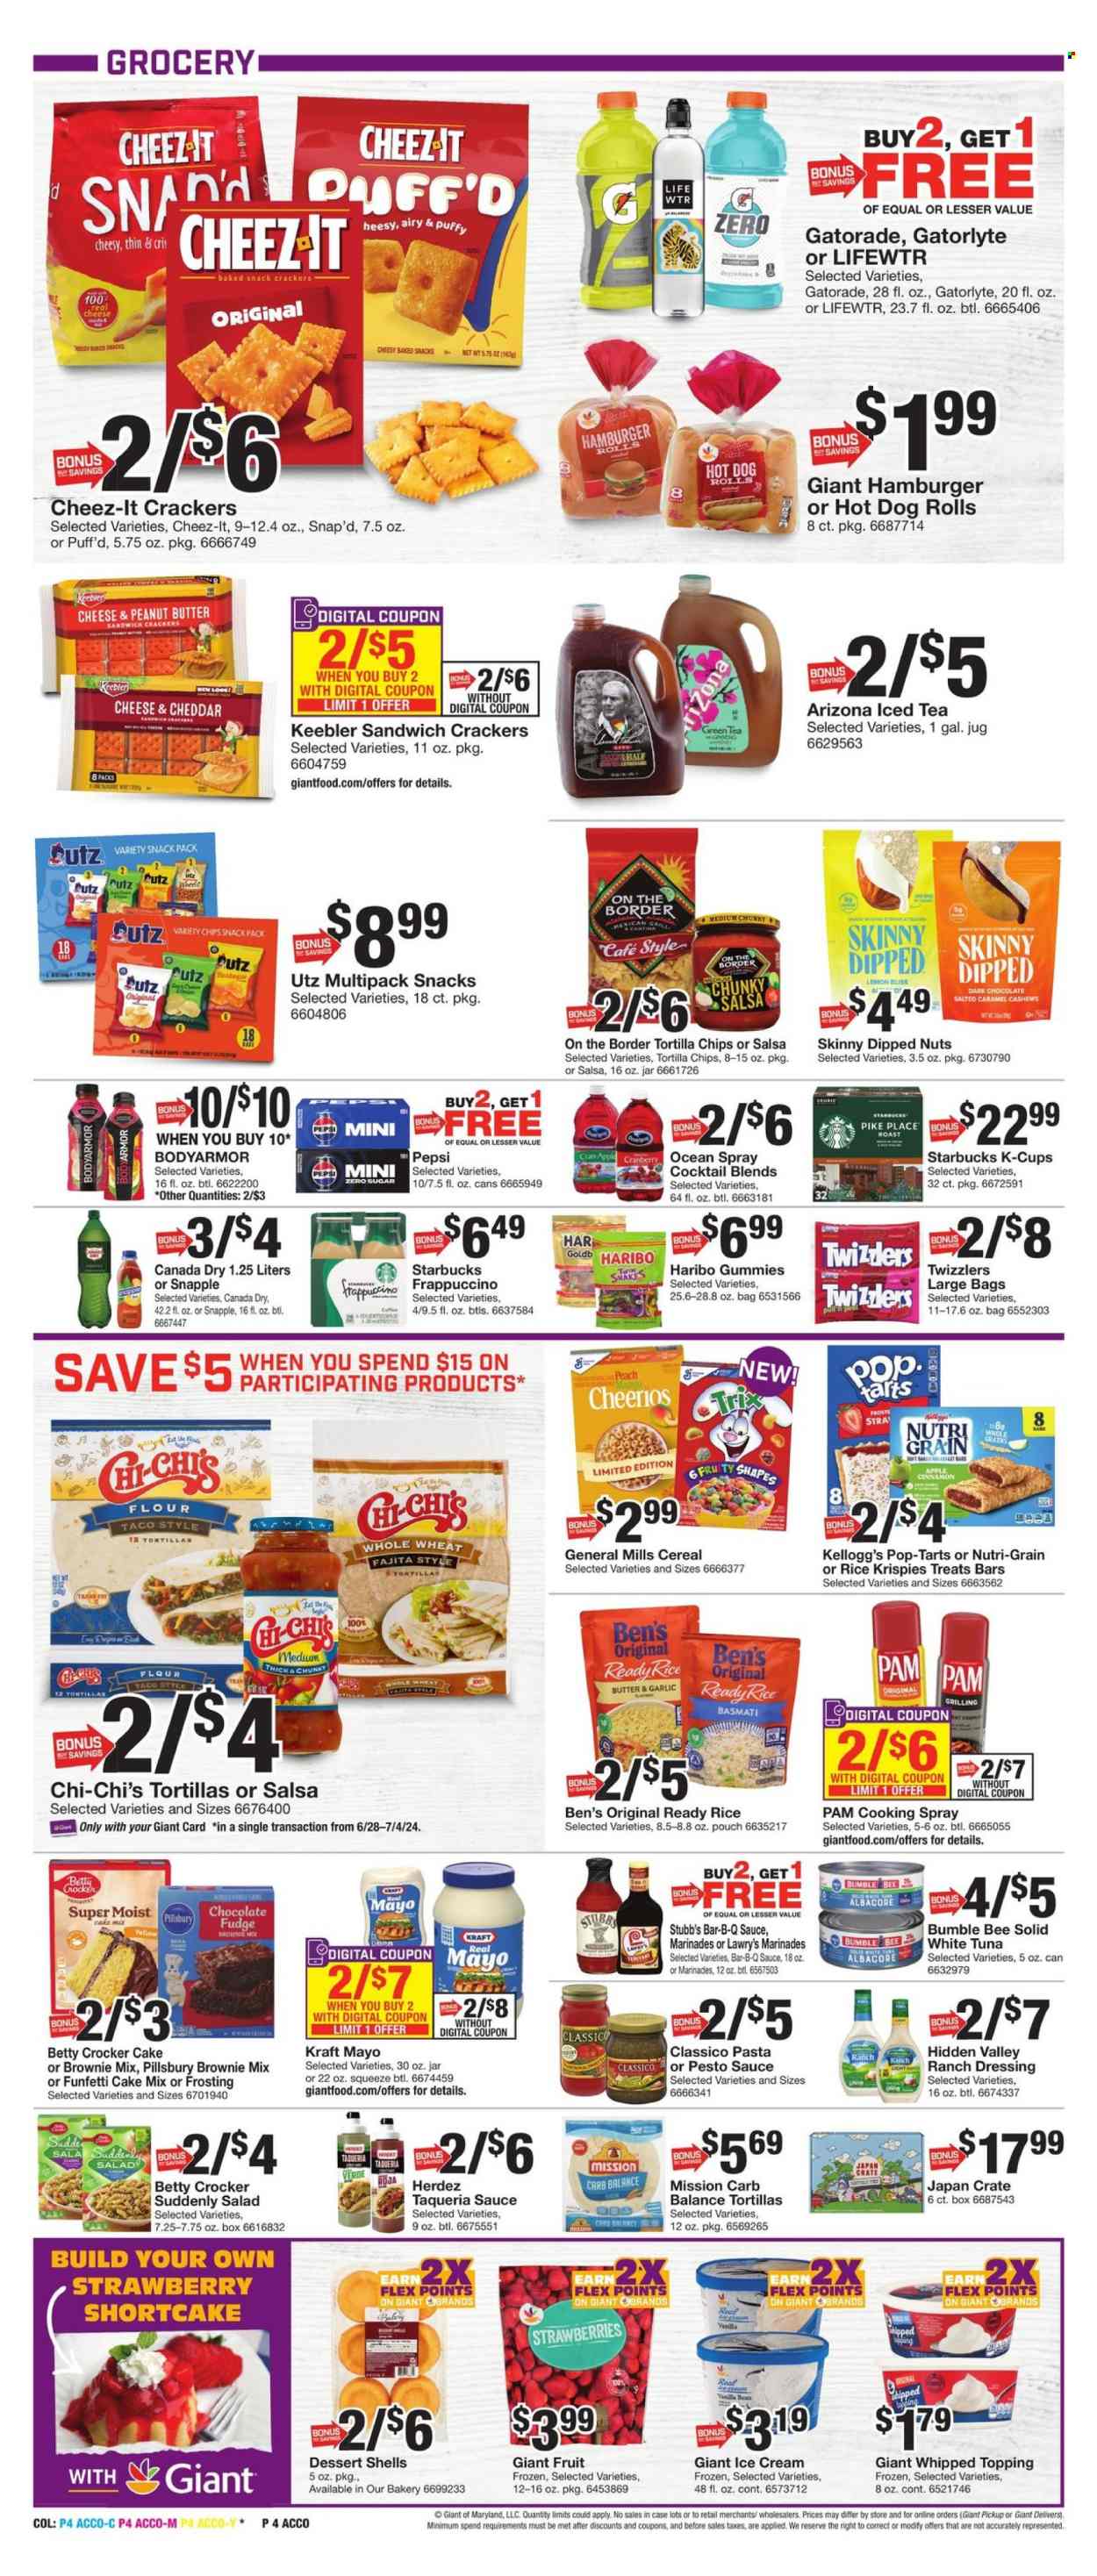 thumbnail - Giant Food Flyer - 06/28/2024 - 07/04/2024 - Sales products - hot dog rolls, cake, burger buns, sandwich rolls, dessert shells, dessert, brownie mix, cake mix, salad, lemons, tuna, Bumble Bee, Pillsbury, fajita, Kraft®, roast, ready meal, rice sides, snack bar, ranch dressing, ice cream, Haribo, crackers, Kellogg's, Pop-Tarts, Keebler, General Mills, sweets, gummies, tortilla chips, Cheez-It, salty snack, frosting, baking mix, canned tuna, Uncle Ben's, canned fish, cereals, Cheerios, Trix, Nutri-Grain, basmati rice, cinnamon, pesto, dressing, marinade, Classico, cooking spray, cashews, Canada Dry, ginger ale, Pepsi, juice, fruit drink, ice tea, soft drink, AriZona, Snapple, Gatorade, electrolyte drink, bottled water, purified water, Lifewtr, water, carbonated soft drink, coffee drink, Starbucks, coffee capsules, K-Cups, frappuccino, crate, book, ginseng. Page 6.